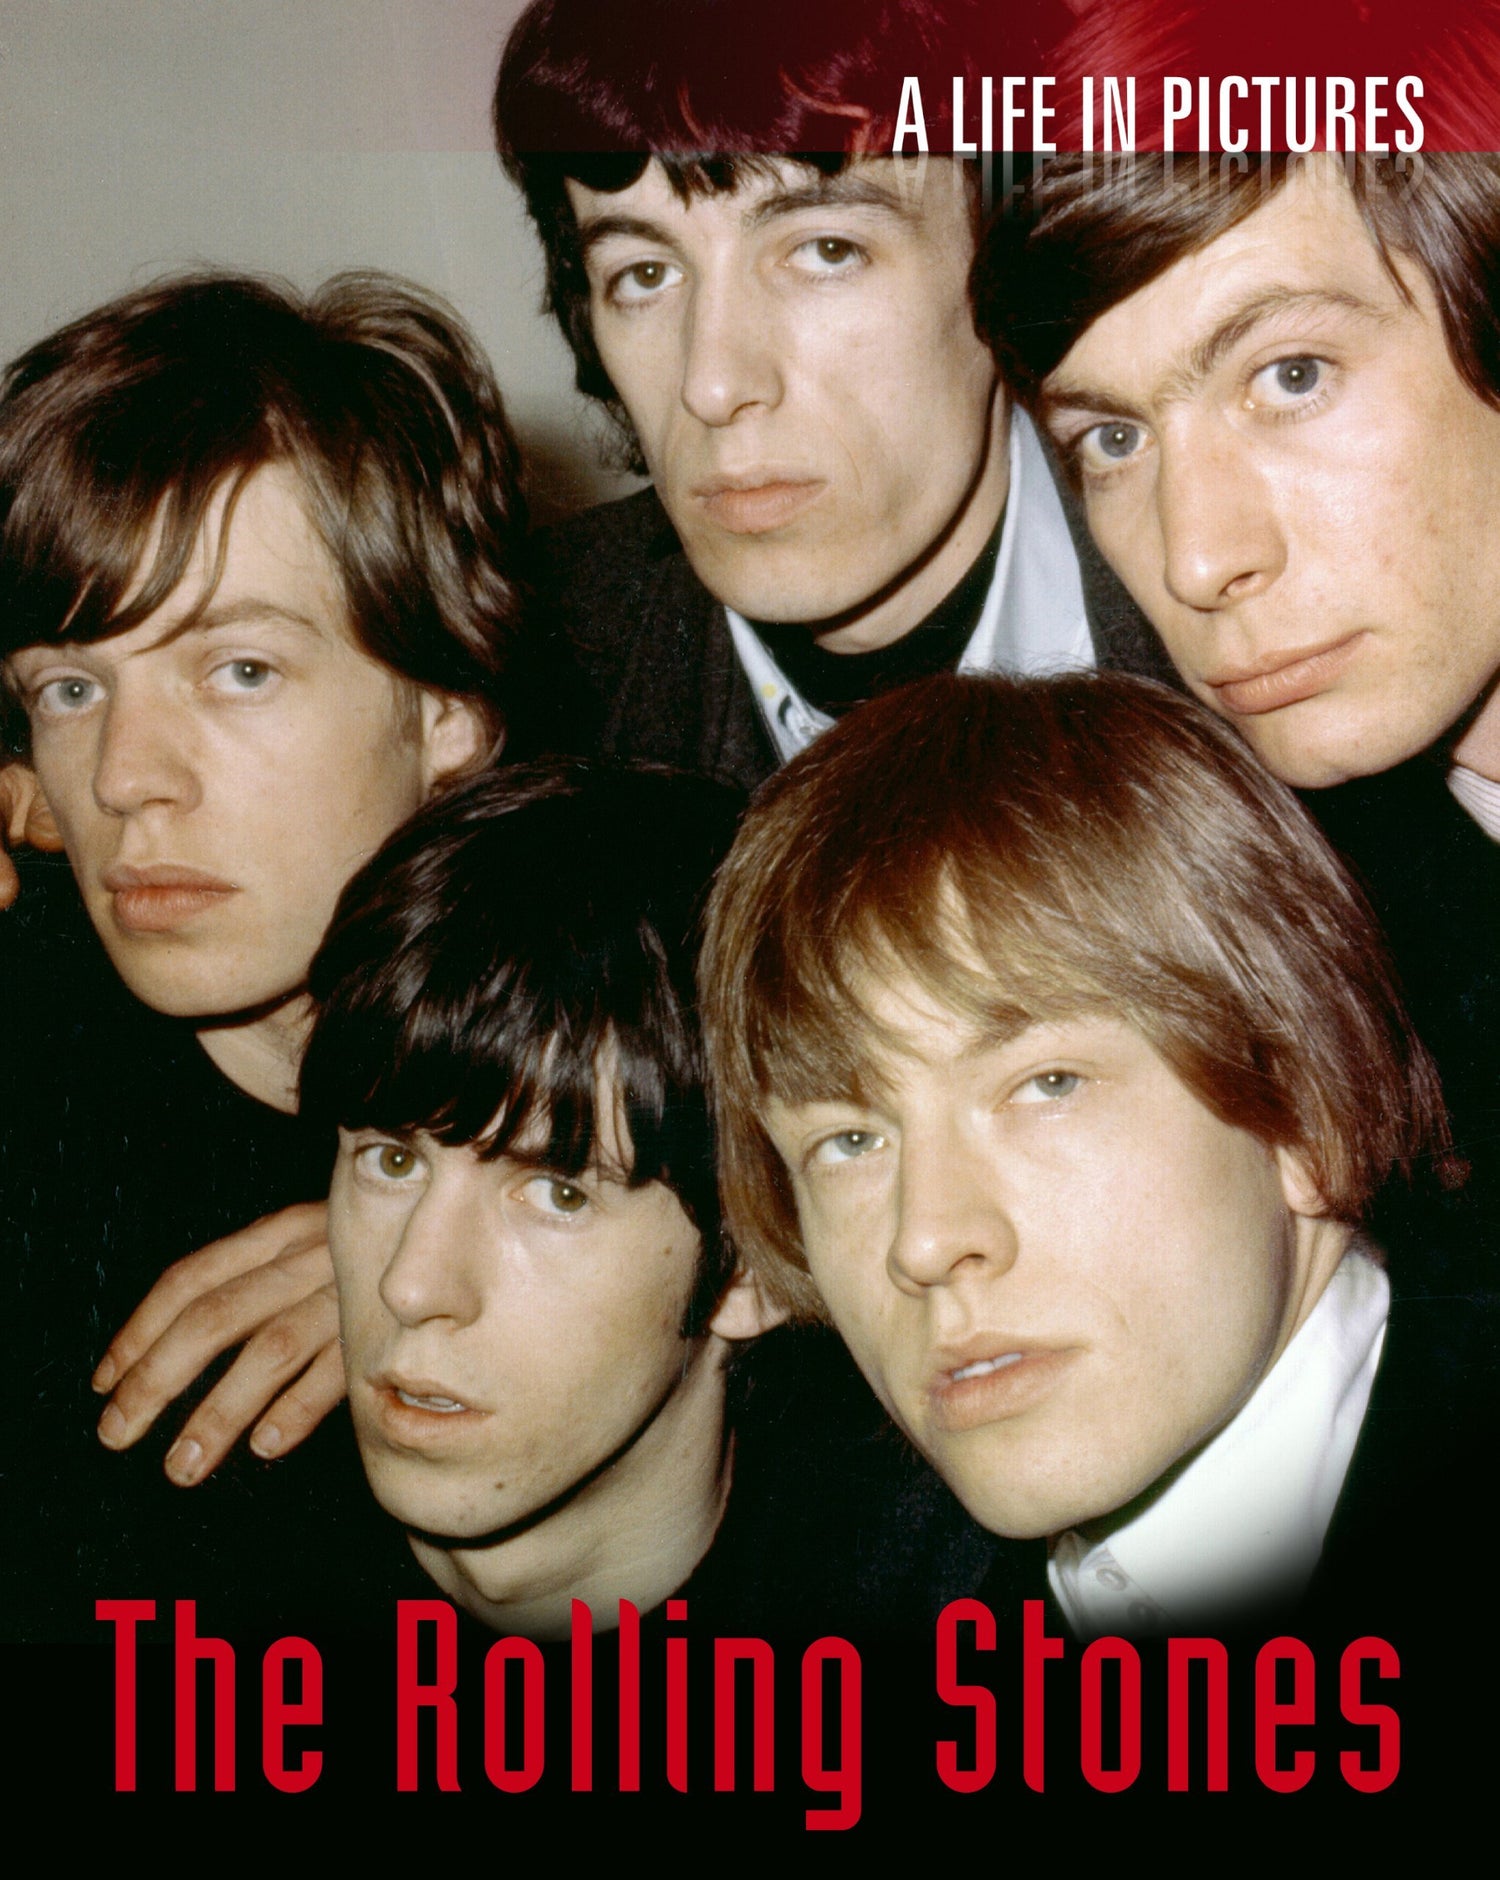 Rolling Stones (Life in Pictures - D'Autores